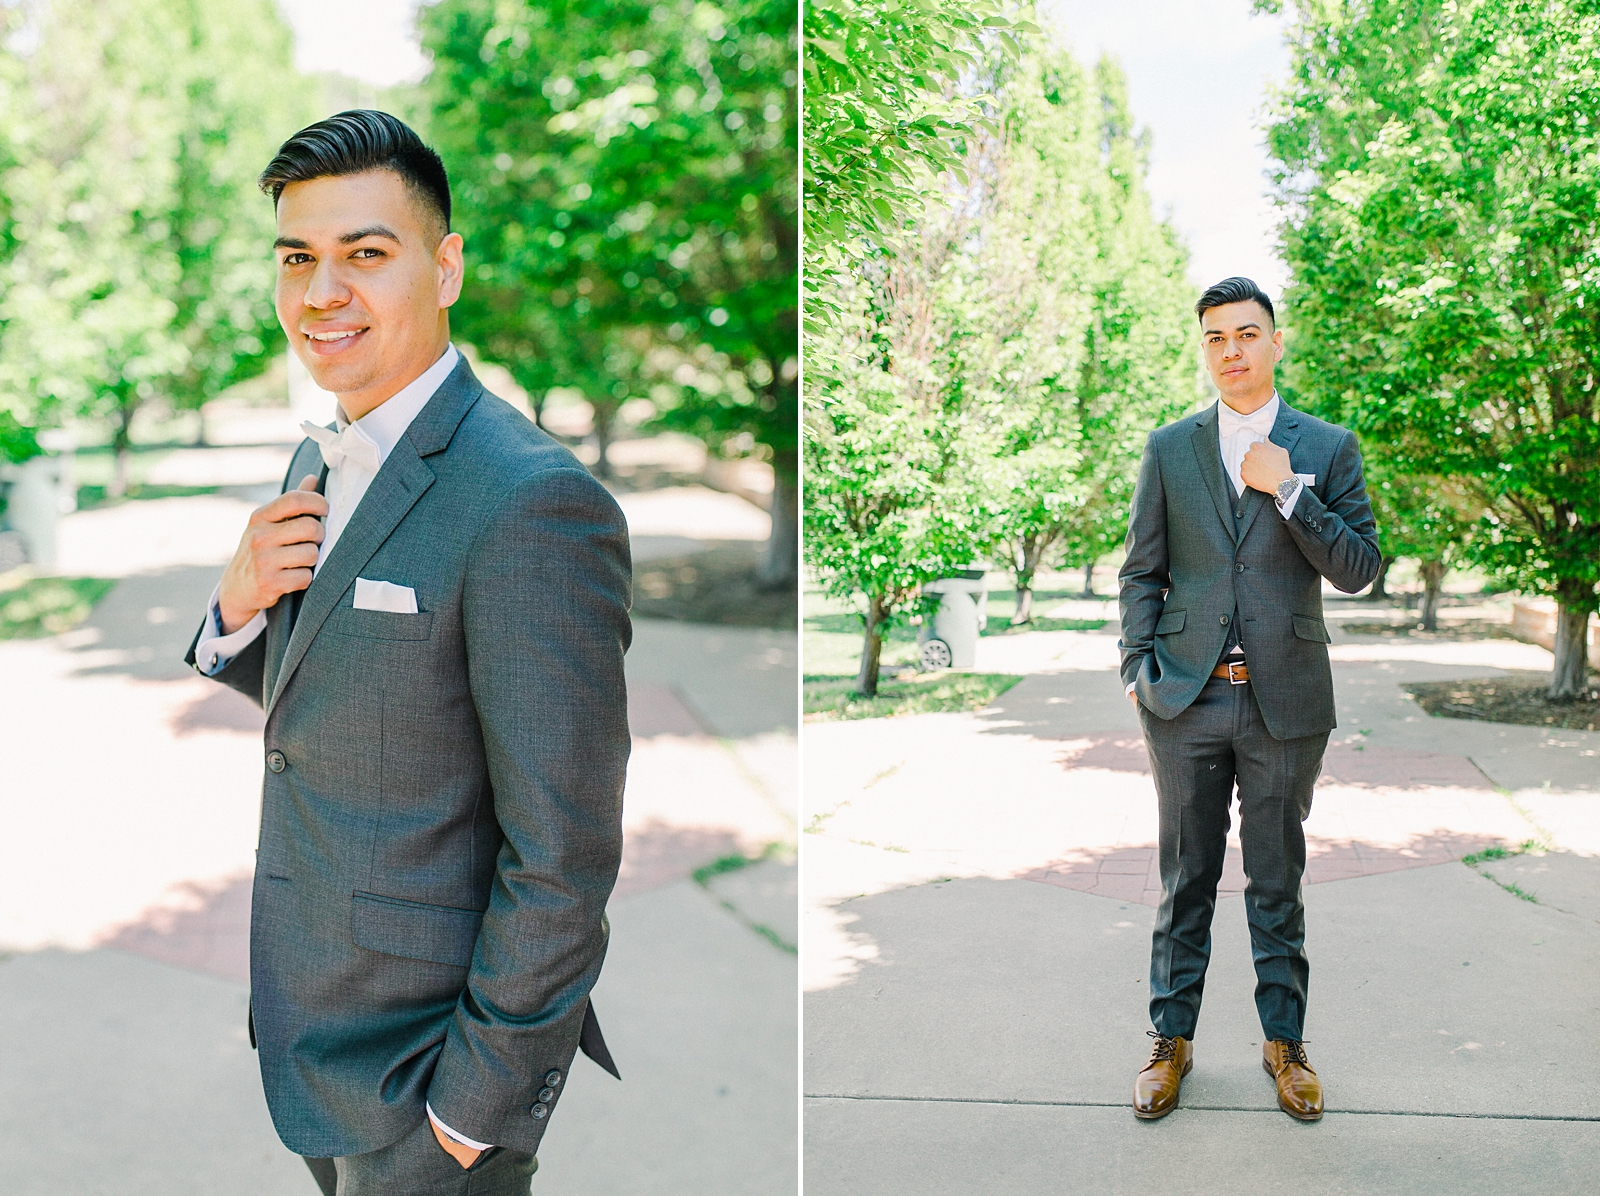 Cache Valley Logan Traditional Catholic Wedding Ceremony in a cathedral, Utah wedding photography, groom in dark gray suit with white bowtie